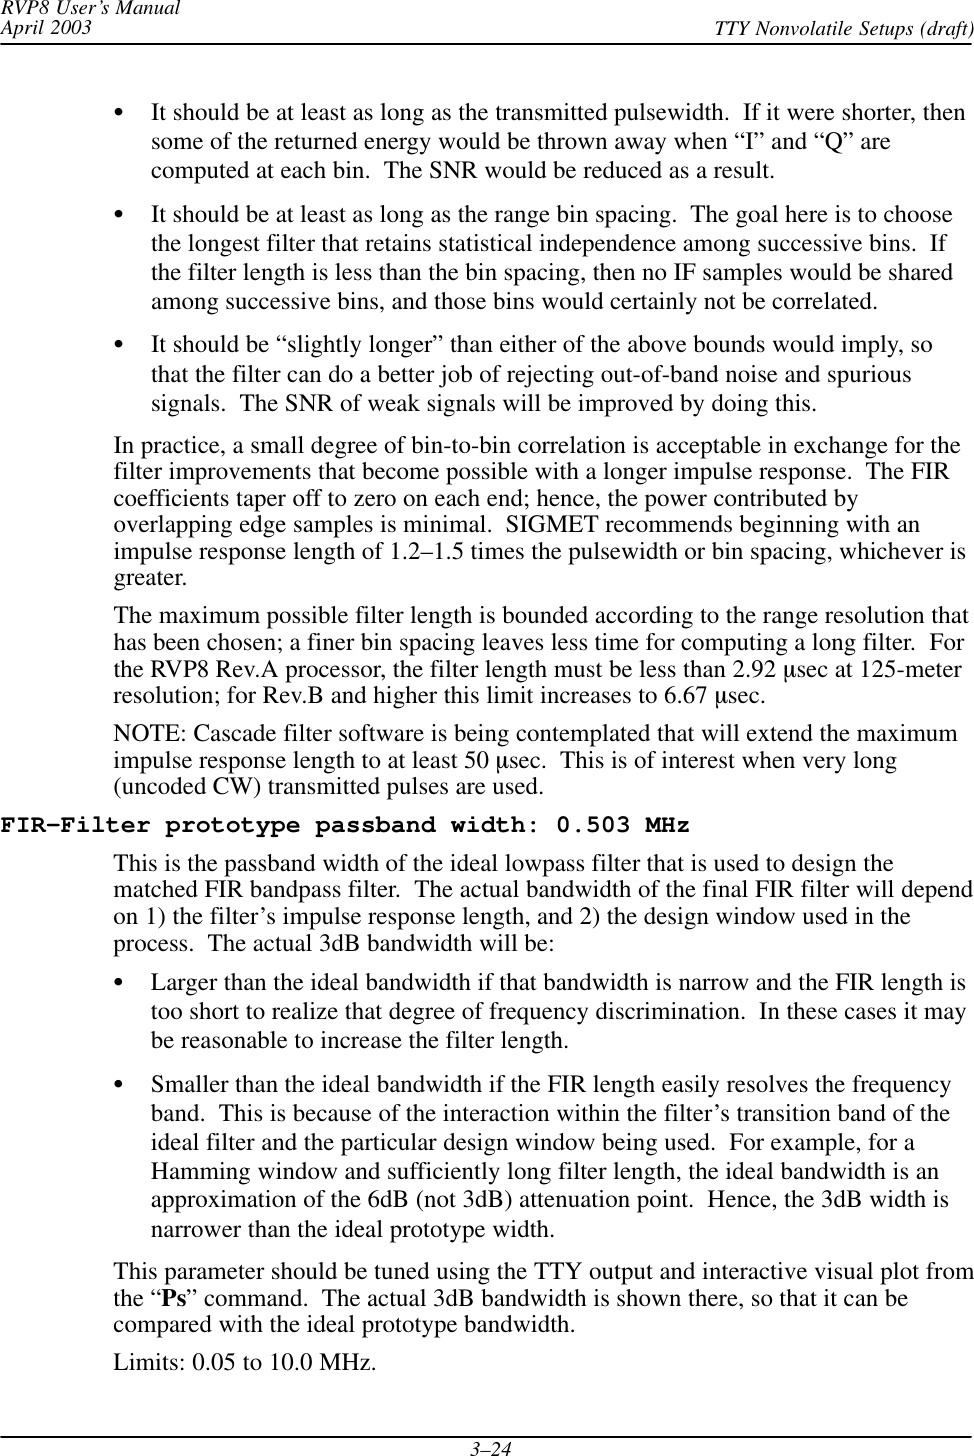 RVP8 User’s ManualApril 2003 TTY Nonvolatile Setups (draft)3–24It should be at least as long as the transmitted pulsewidth.  If it were shorter, thensome of the returned energy would be thrown away when “I” and “Q” arecomputed at each bin.  The SNR would be reduced as a result.It should be at least as long as the range bin spacing.  The goal here is to choosethe longest filter that retains statistical independence among successive bins.  Ifthe filter length is less than the bin spacing, then no IF samples would be sharedamong successive bins, and those bins would certainly not be correlated.It should be “slightly longer” than either of the above bounds would imply, sothat the filter can do a better job of rejecting out-of-band noise and spurioussignals.  The SNR of weak signals will be improved by doing this.In practice, a small degree of bin-to-bin correlation is acceptable in exchange for thefilter improvements that become possible with a longer impulse response.  The FIRcoefficients taper off to zero on each end; hence, the power contributed byoverlapping edge samples is minimal.  SIGMET recommends beginning with animpulse response length of 1.2–1.5 times the pulsewidth or bin spacing, whichever isgreater.The maximum possible filter length is bounded according to the range resolution thathas been chosen; a finer bin spacing leaves less time for computing a long filter.  Forthe RVP8 Rev.A processor, the filter length must be less than 2.92 sec at 125-meterresolution; for Rev.B and higher this limit increases to 6.67 sec.NOTE: Cascade filter software is being contemplated that will extend the maximumimpulse response length to at least 50 sec.  This is of interest when very long(uncoded CW) transmitted pulses are used.FIR-Filter prototype passband width: 0.503 MHzThis is the passband width of the ideal lowpass filter that is used to design thematched FIR bandpass filter.  The actual bandwidth of the final FIR filter will dependon 1) the filter’s impulse response length, and 2) the design window used in theprocess.  The actual 3dB bandwidth will be:Larger than the ideal bandwidth if that bandwidth is narrow and the FIR length istoo short to realize that degree of frequency discrimination.  In these cases it maybe reasonable to increase the filter length.Smaller than the ideal bandwidth if the FIR length easily resolves the frequencyband.  This is because of the interaction within the filter’s transition band of theideal filter and the particular design window being used.  For example, for aHamming window and sufficiently long filter length, the ideal bandwidth is anapproximation of the 6dB (not 3dB) attenuation point.  Hence, the 3dB width isnarrower than the ideal prototype width.This parameter should be tuned using the TTY output and interactive visual plot fromthe “Ps” command.  The actual 3dB bandwidth is shown there, so that it can becompared with the ideal prototype bandwidth.Limits: 0.05 to 10.0 MHz.